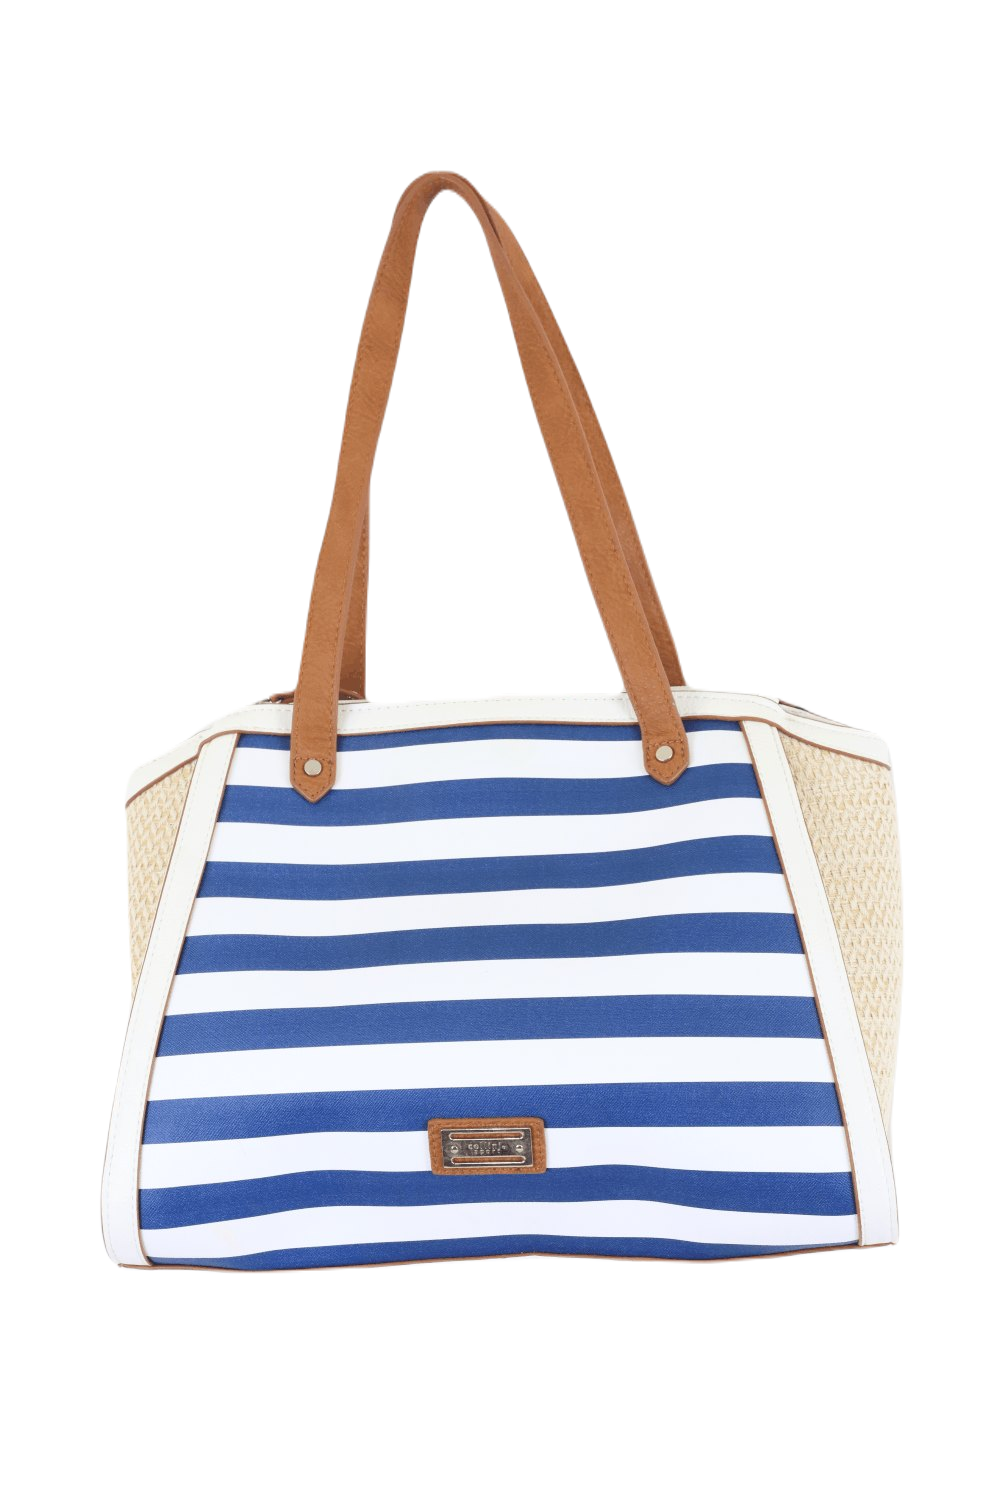 Cellini Blue And White Striped Bag With Cream Woven Pattern Shoulder Bag